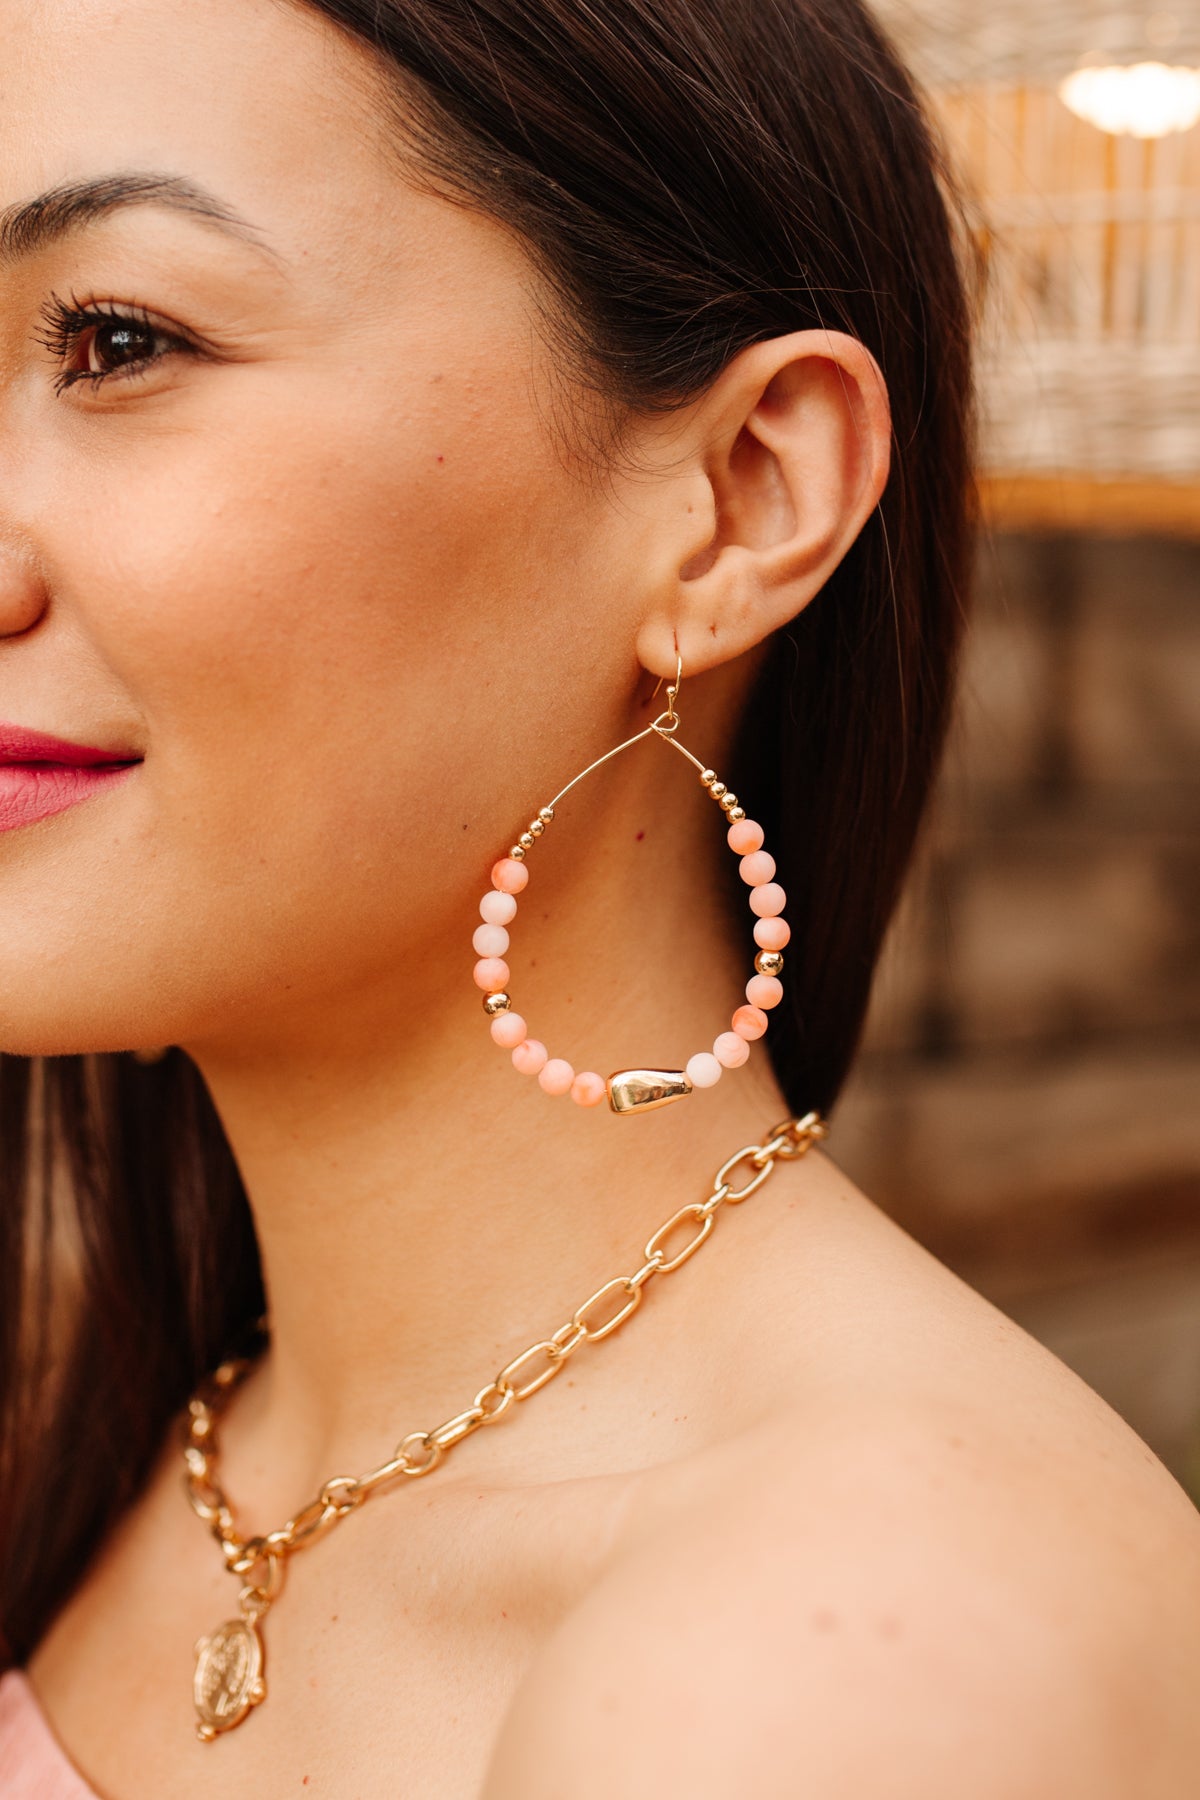 Steal The Show Earrings in Peach